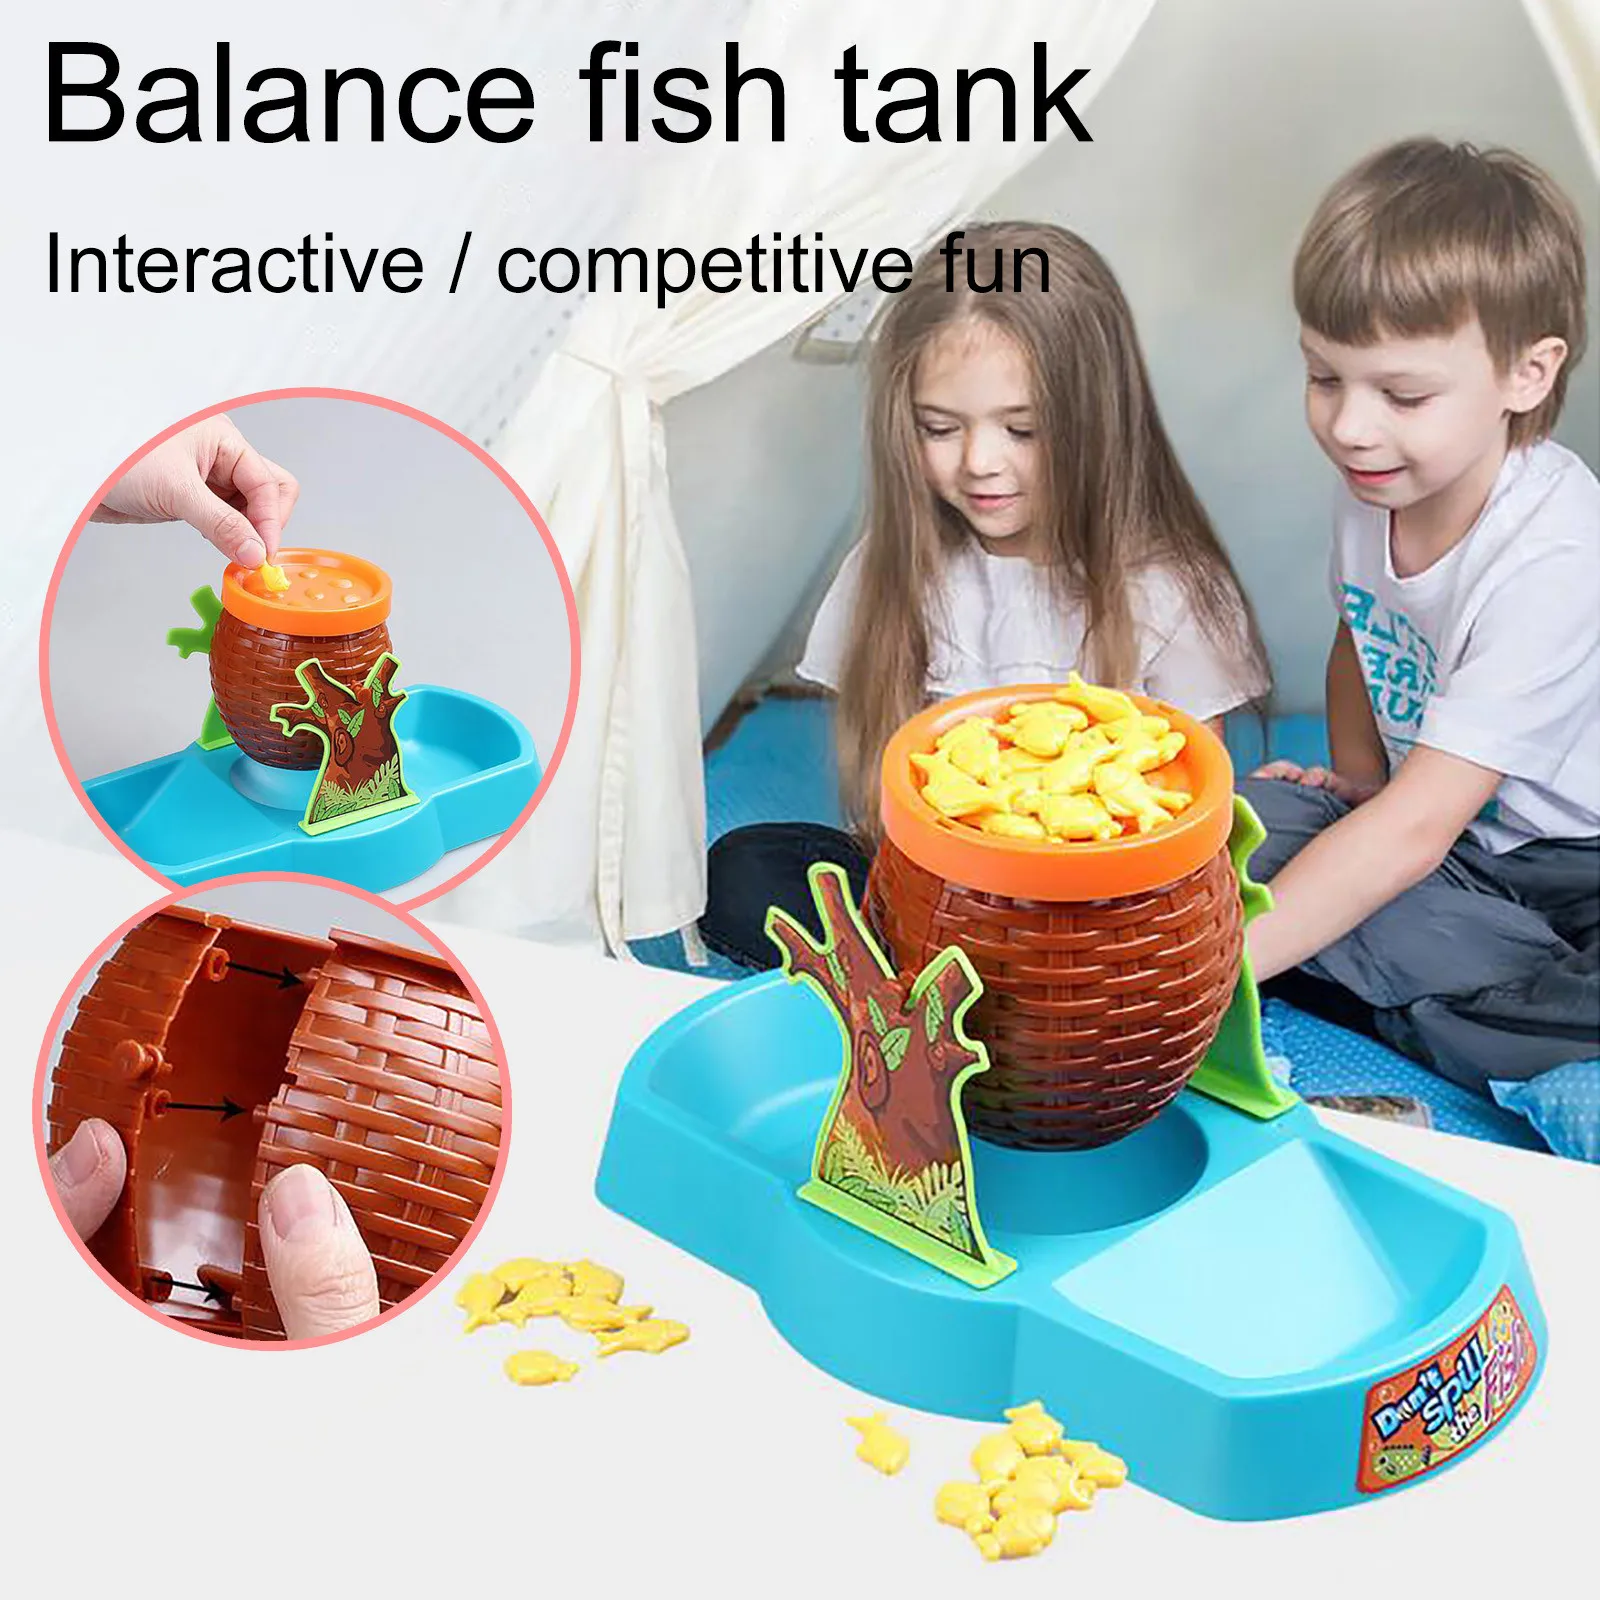 

Children’s Early Education Toys Intellectual Development Board Game Balanced Fish Tank Grilled Fish Game Parent-child Game #40